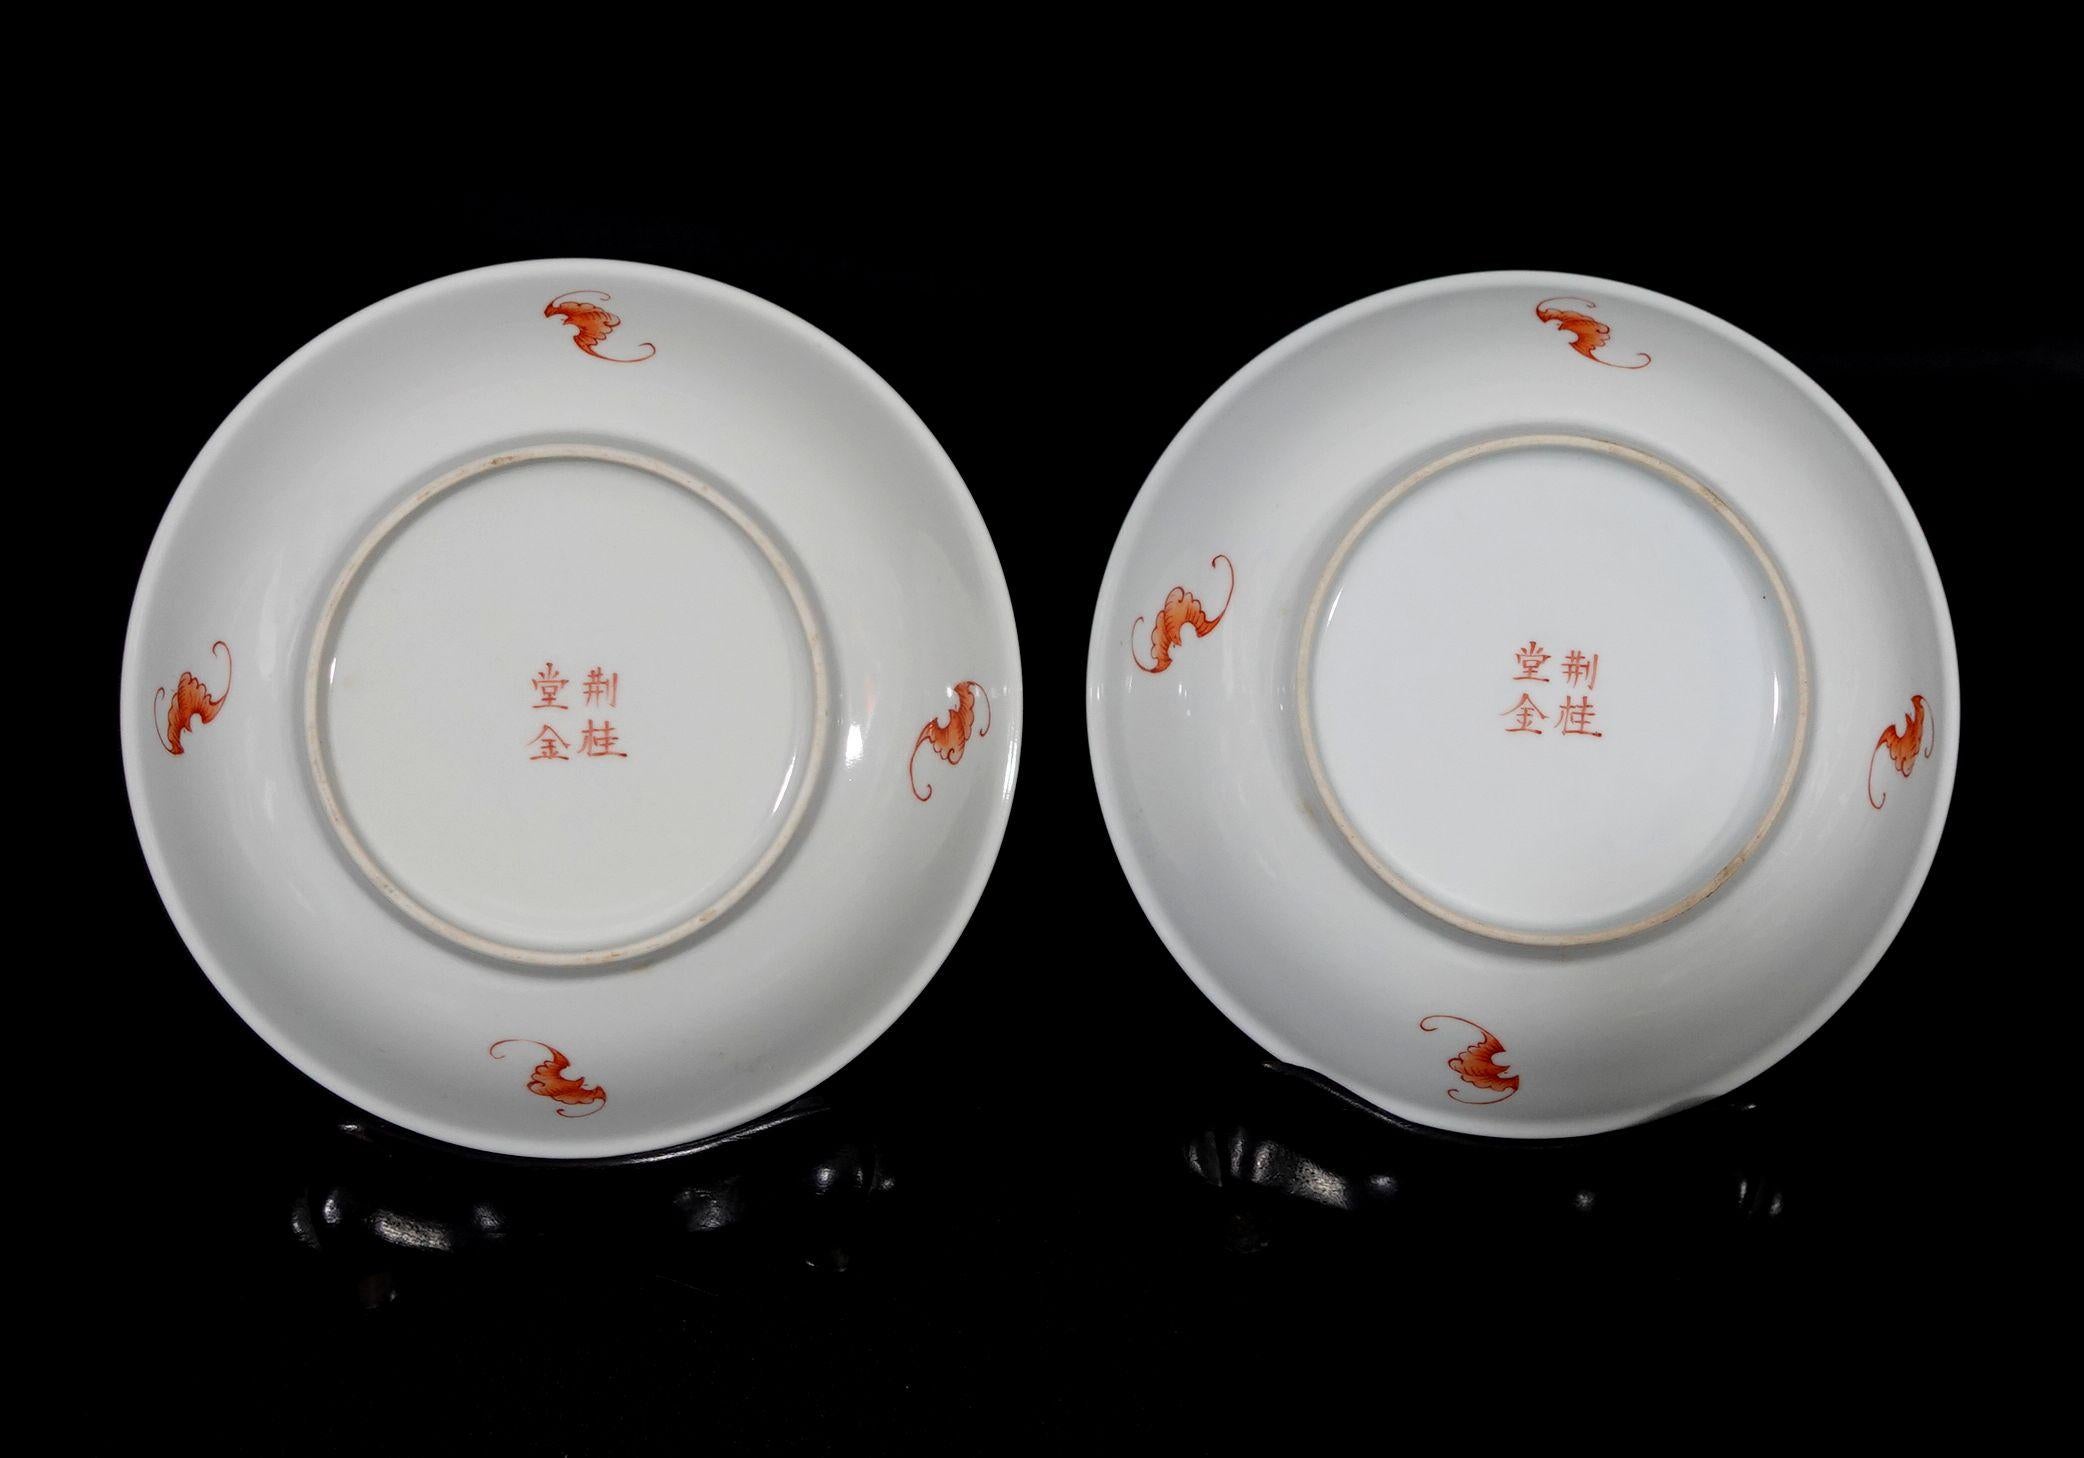 Antique Pair of Famille Rose Plates on Wood Stands Marked (荊桂堂金), 19th Century 2